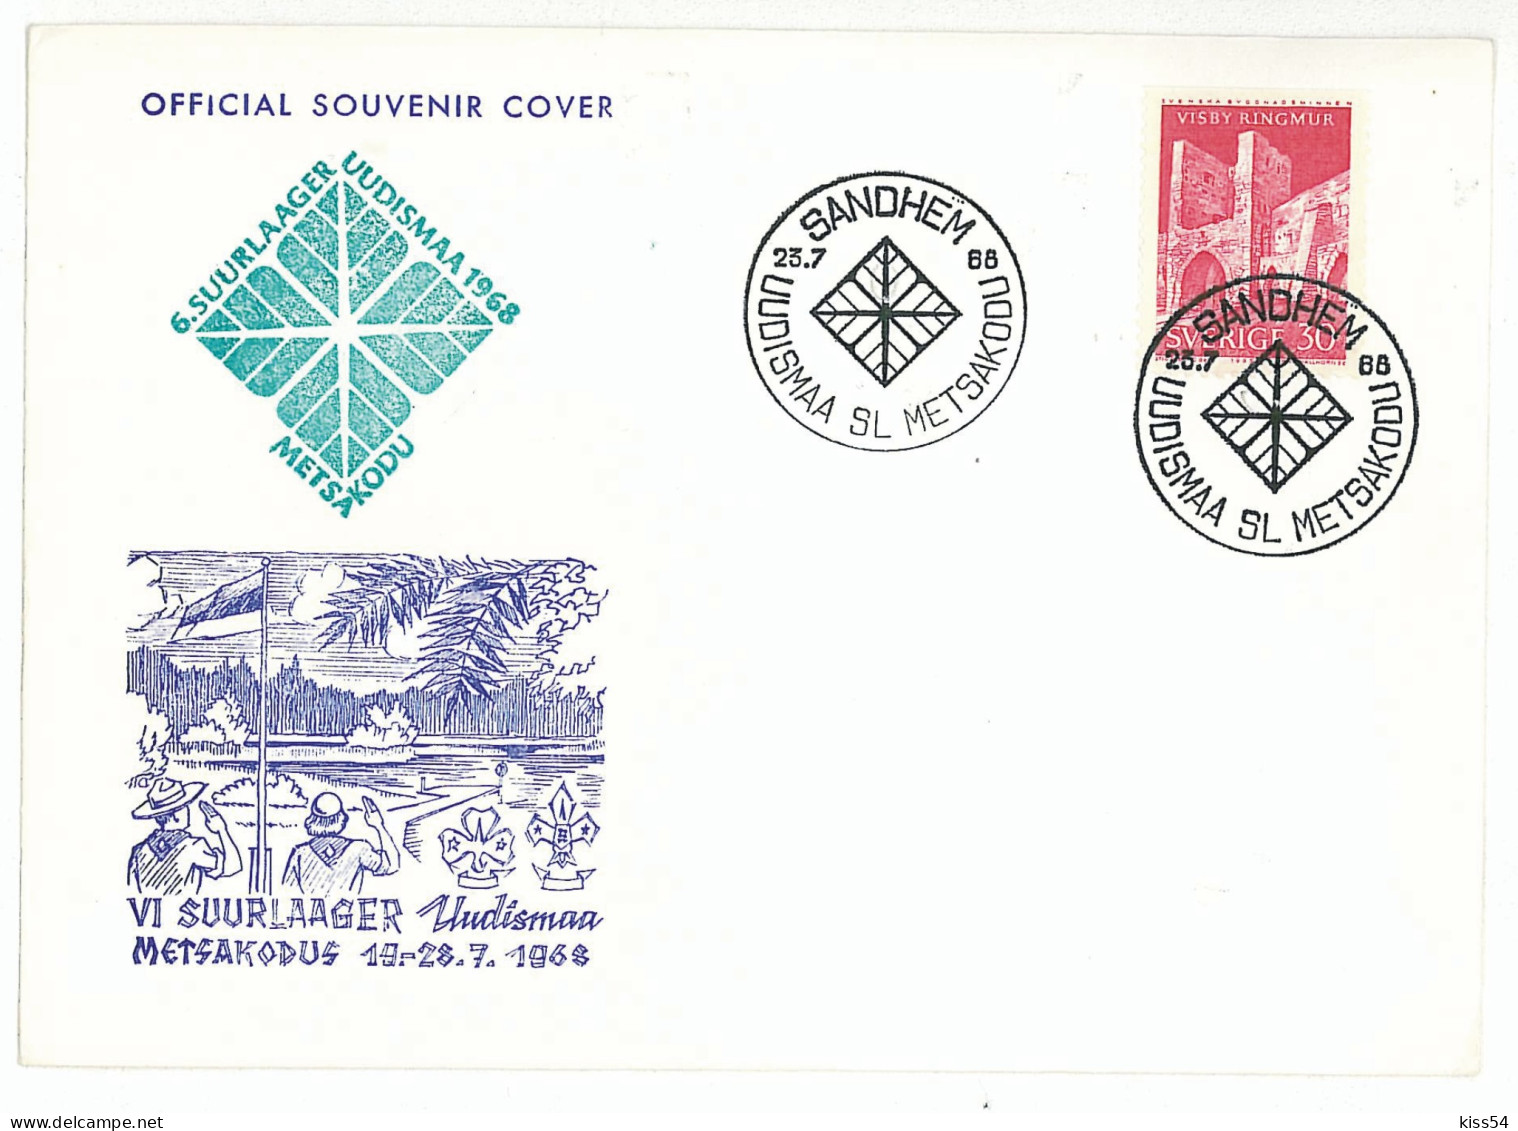 SC 45 - 579 Scout SWEDEN - Cover - Used - 1968 - Covers & Documents